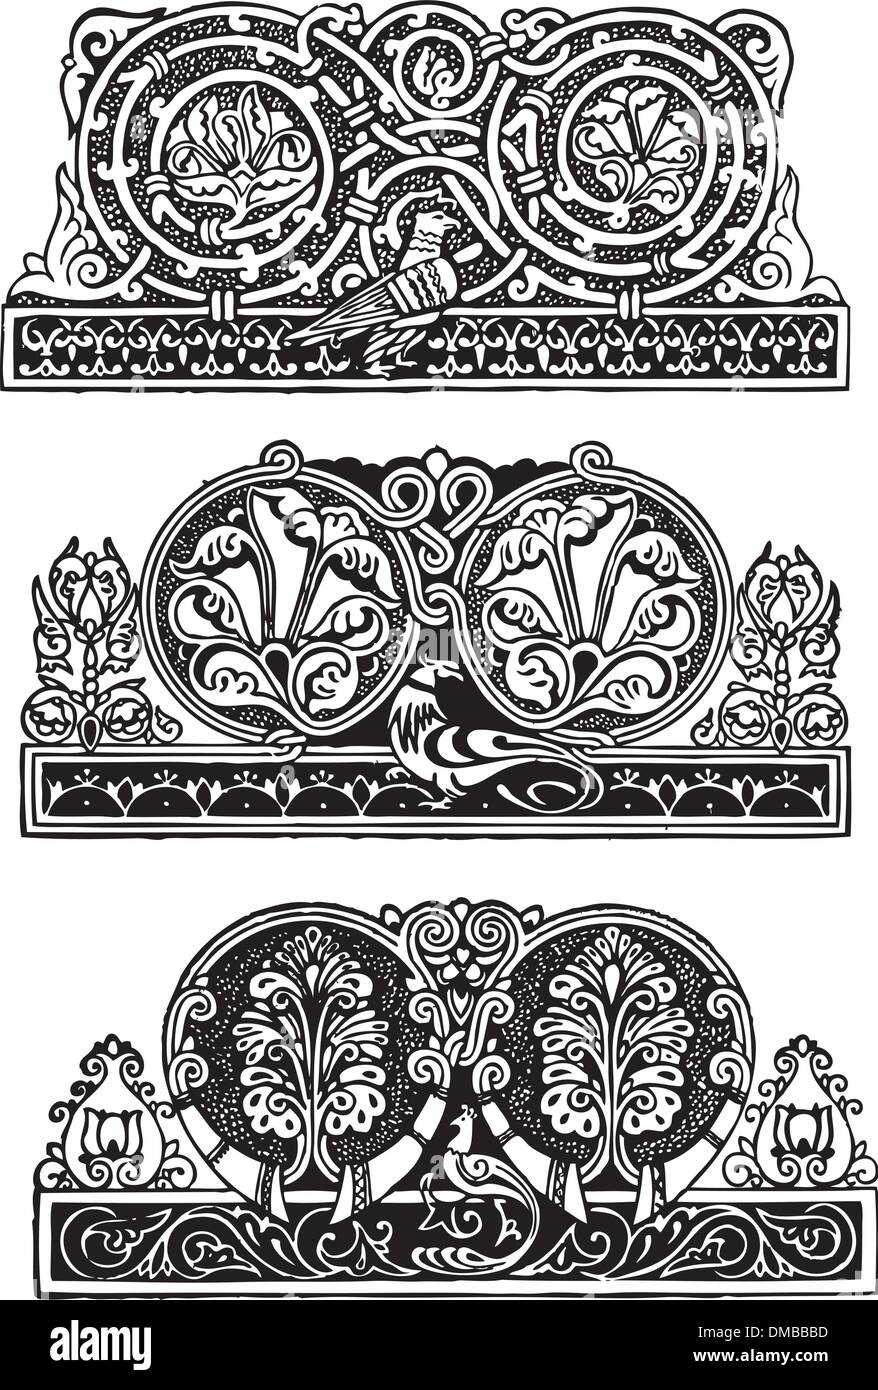 Ornament in the Gothic style Stock Vector